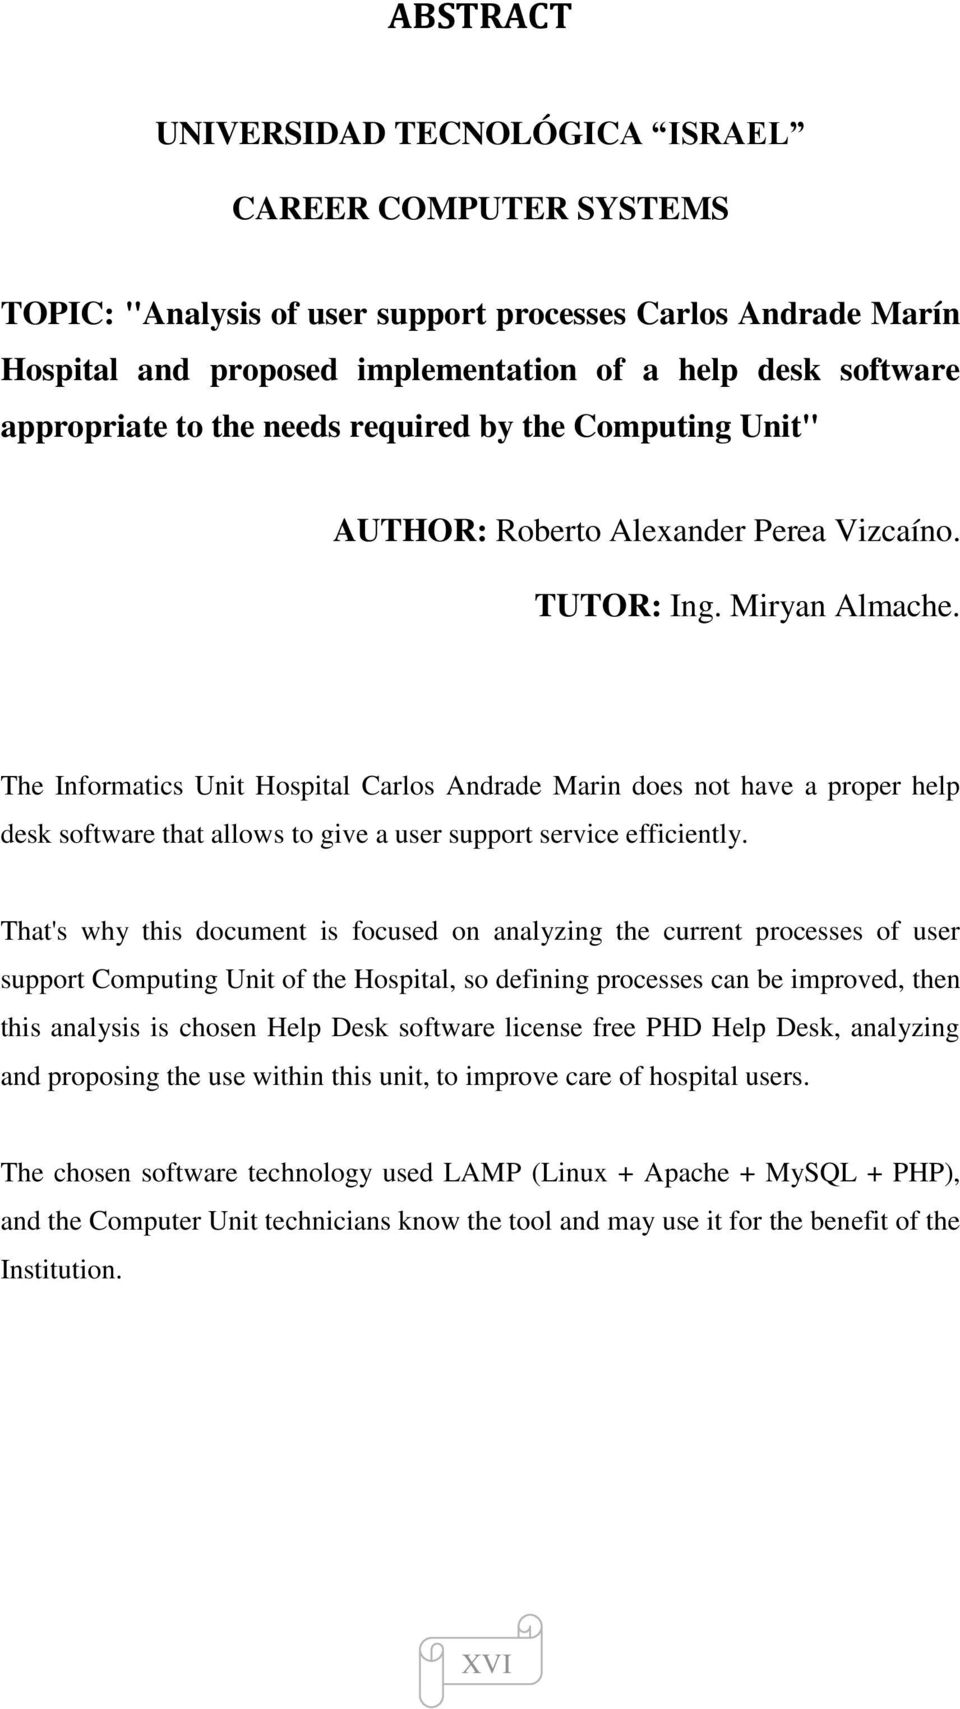 The Informatics Unit Hospital Carlos Andrade Marin does not have a proper help desk software that allows to give a user support service efficiently.